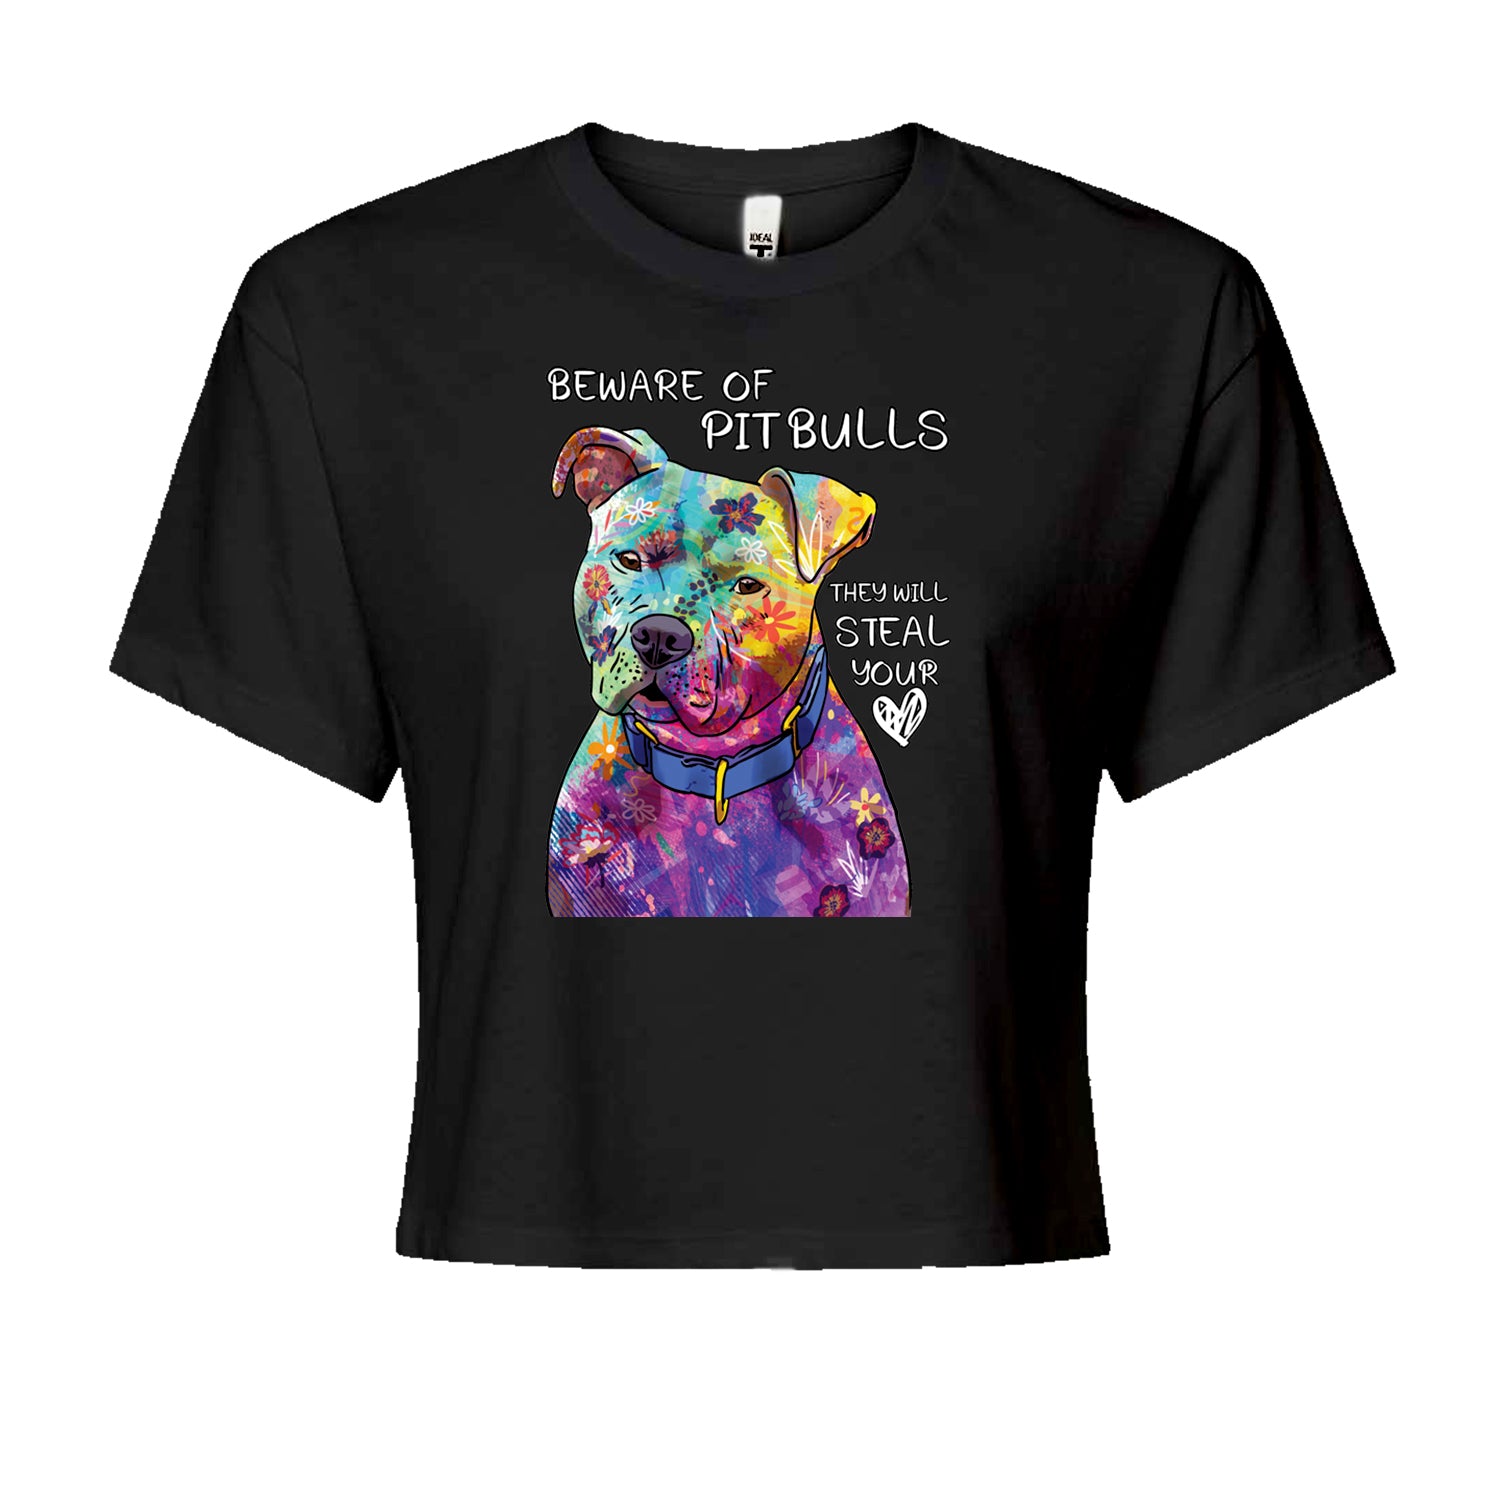 Beware Of Pit Bulls, They Will Steal Your Heart  Cropped T-Shirt